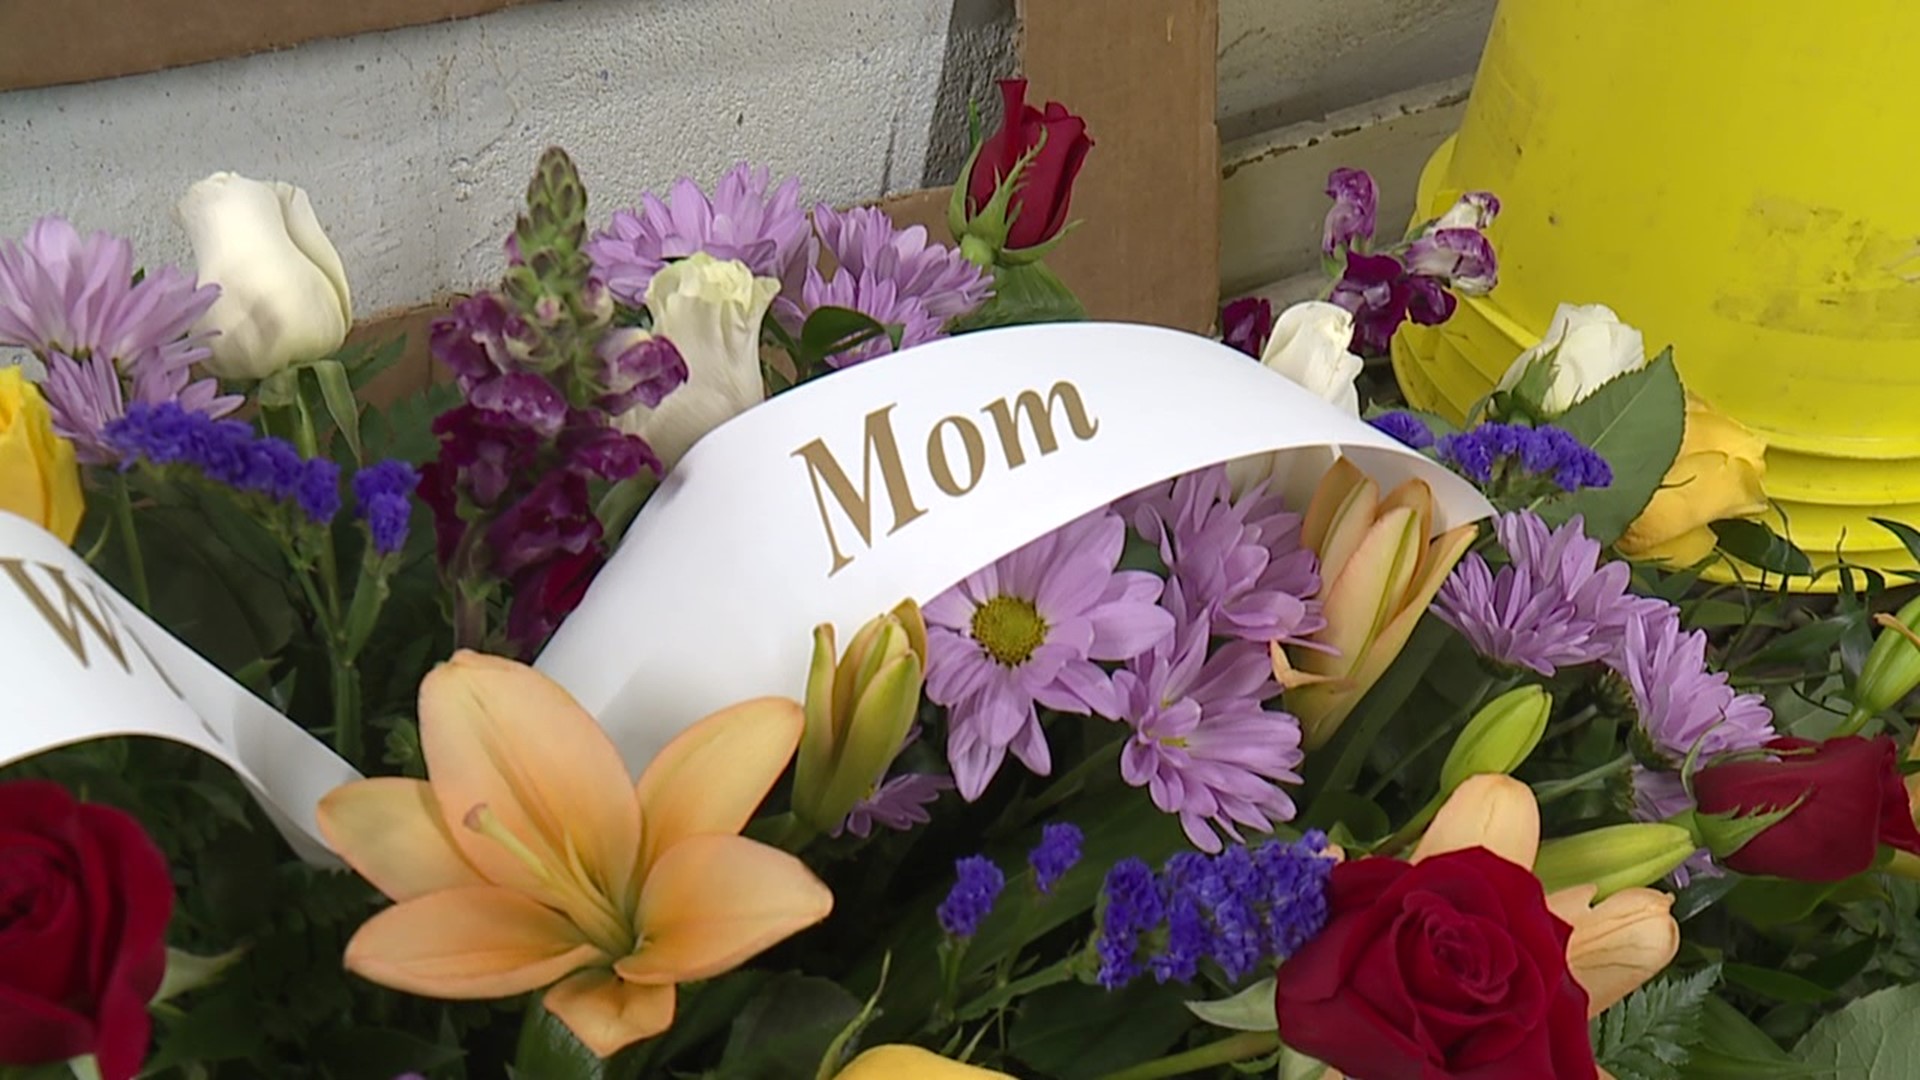 It's no surprise that flower shops are busy ahead of Mother's Day. But this year, the reasons are a bit different.